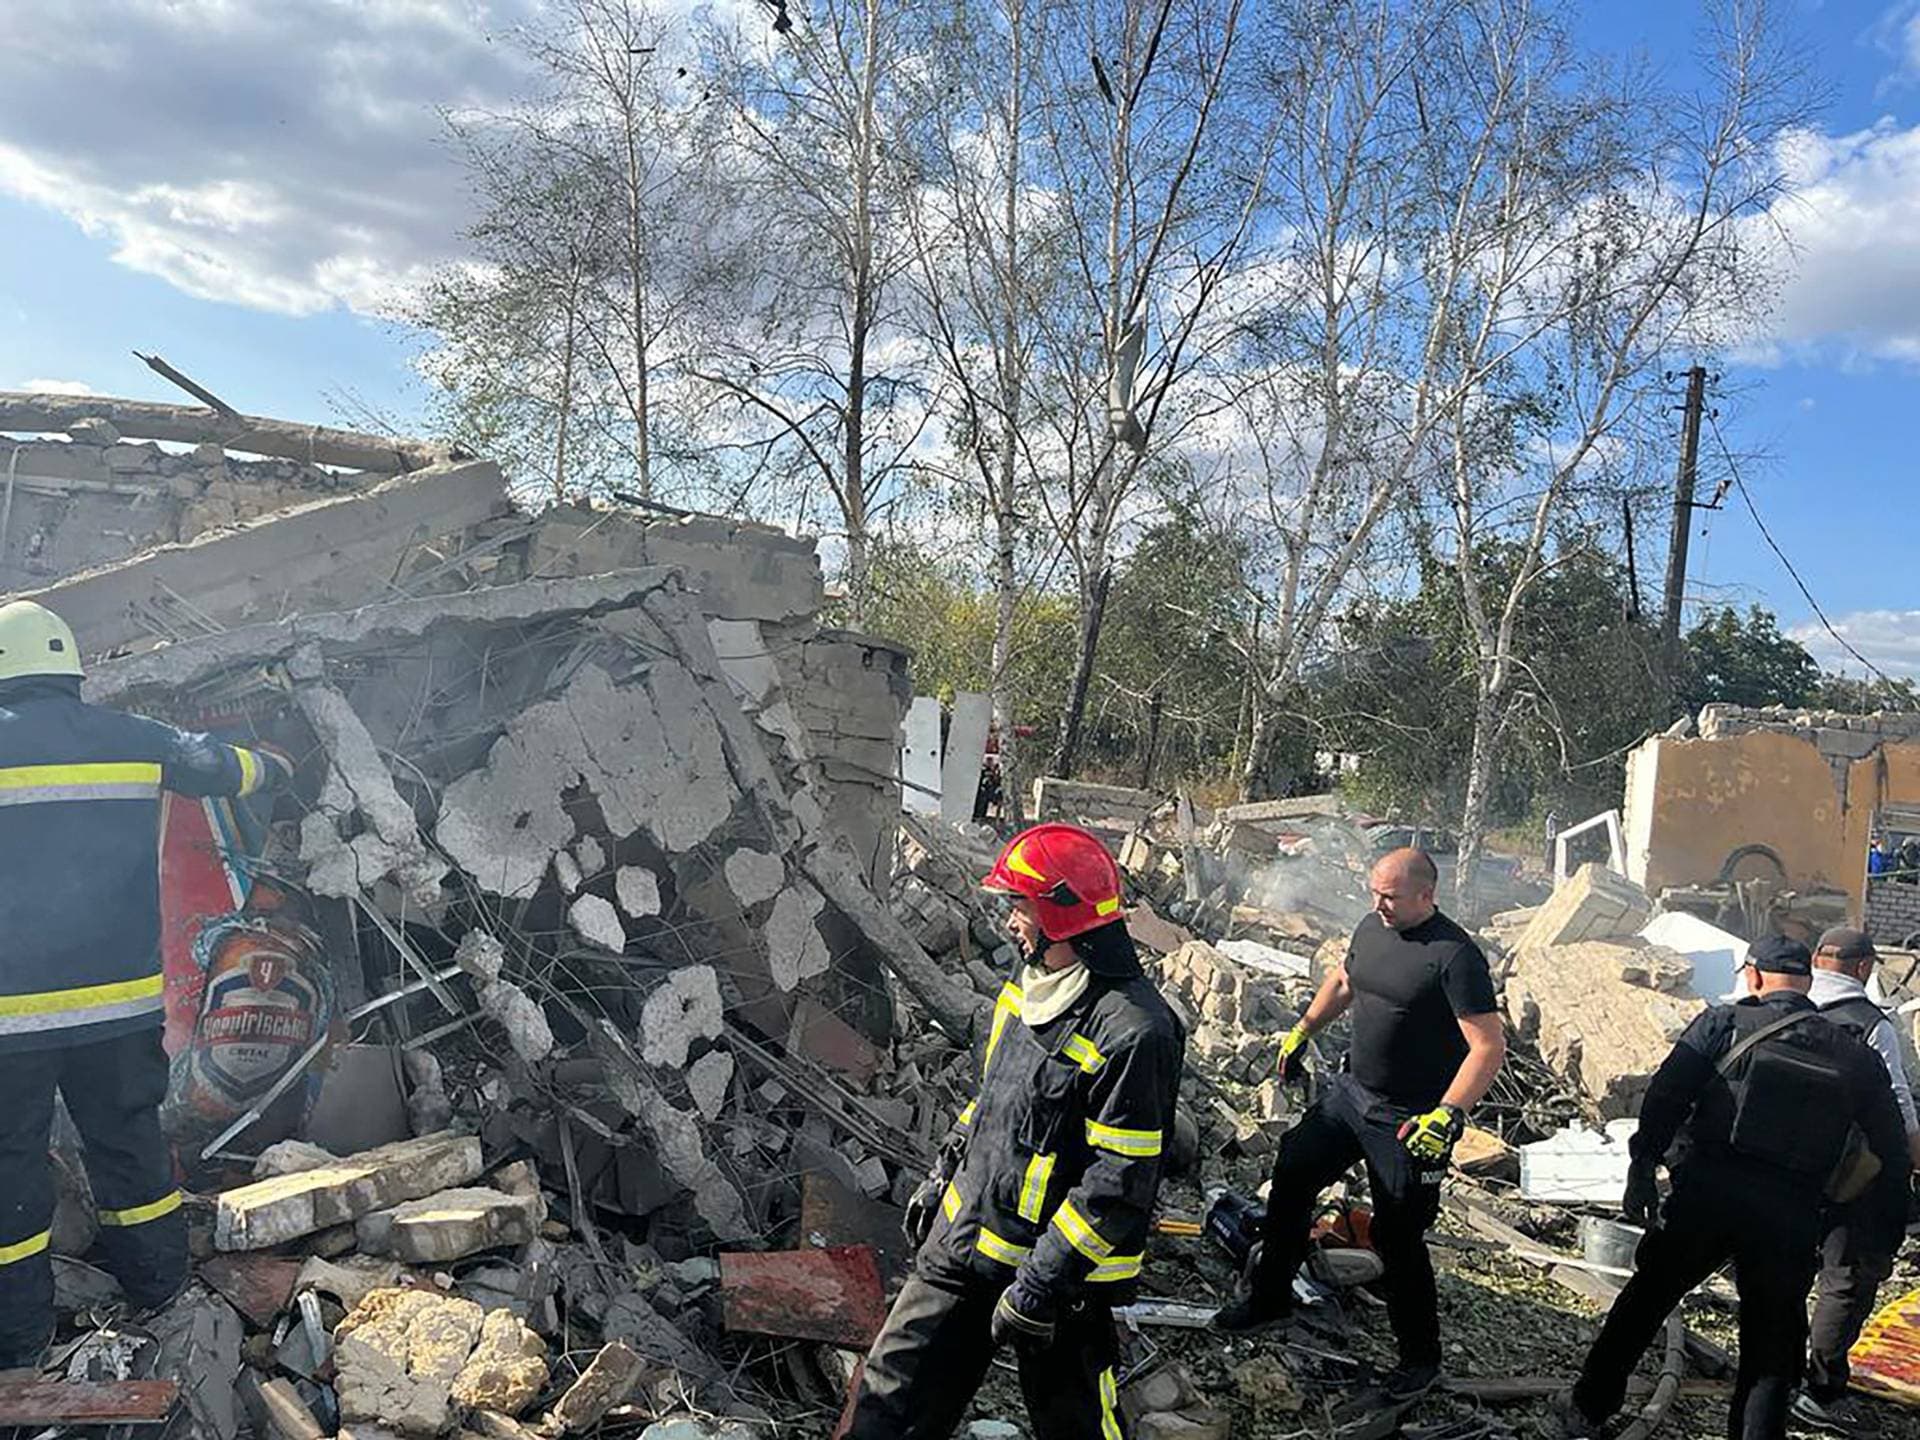 emergency workers search the victims of the deadly Russian rocket attack that killed more than 50 people in the village of Hroza